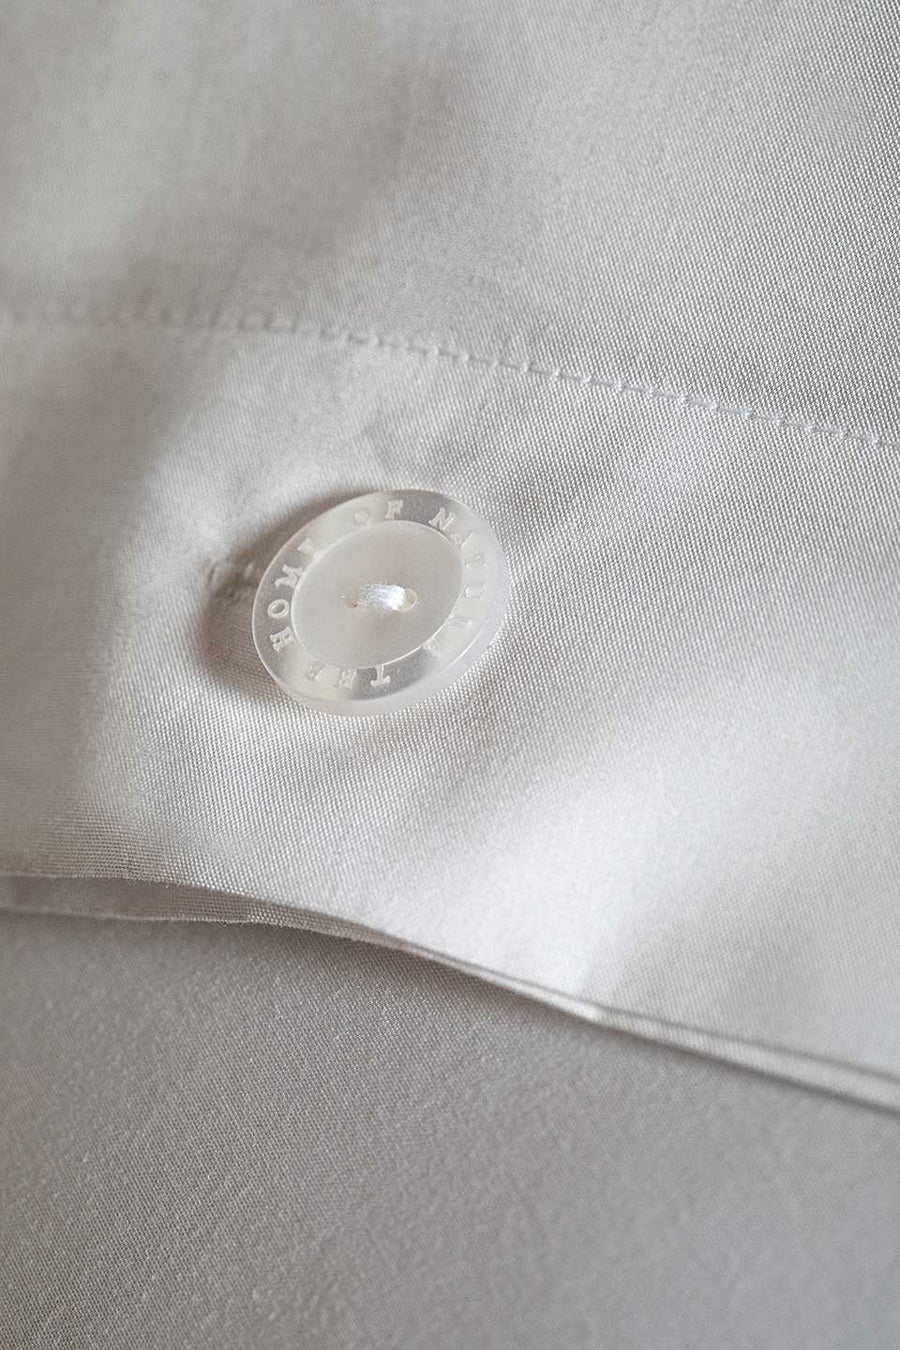 The Home of Nature button on an Egyptian Cotton™ Percale pillowcase.